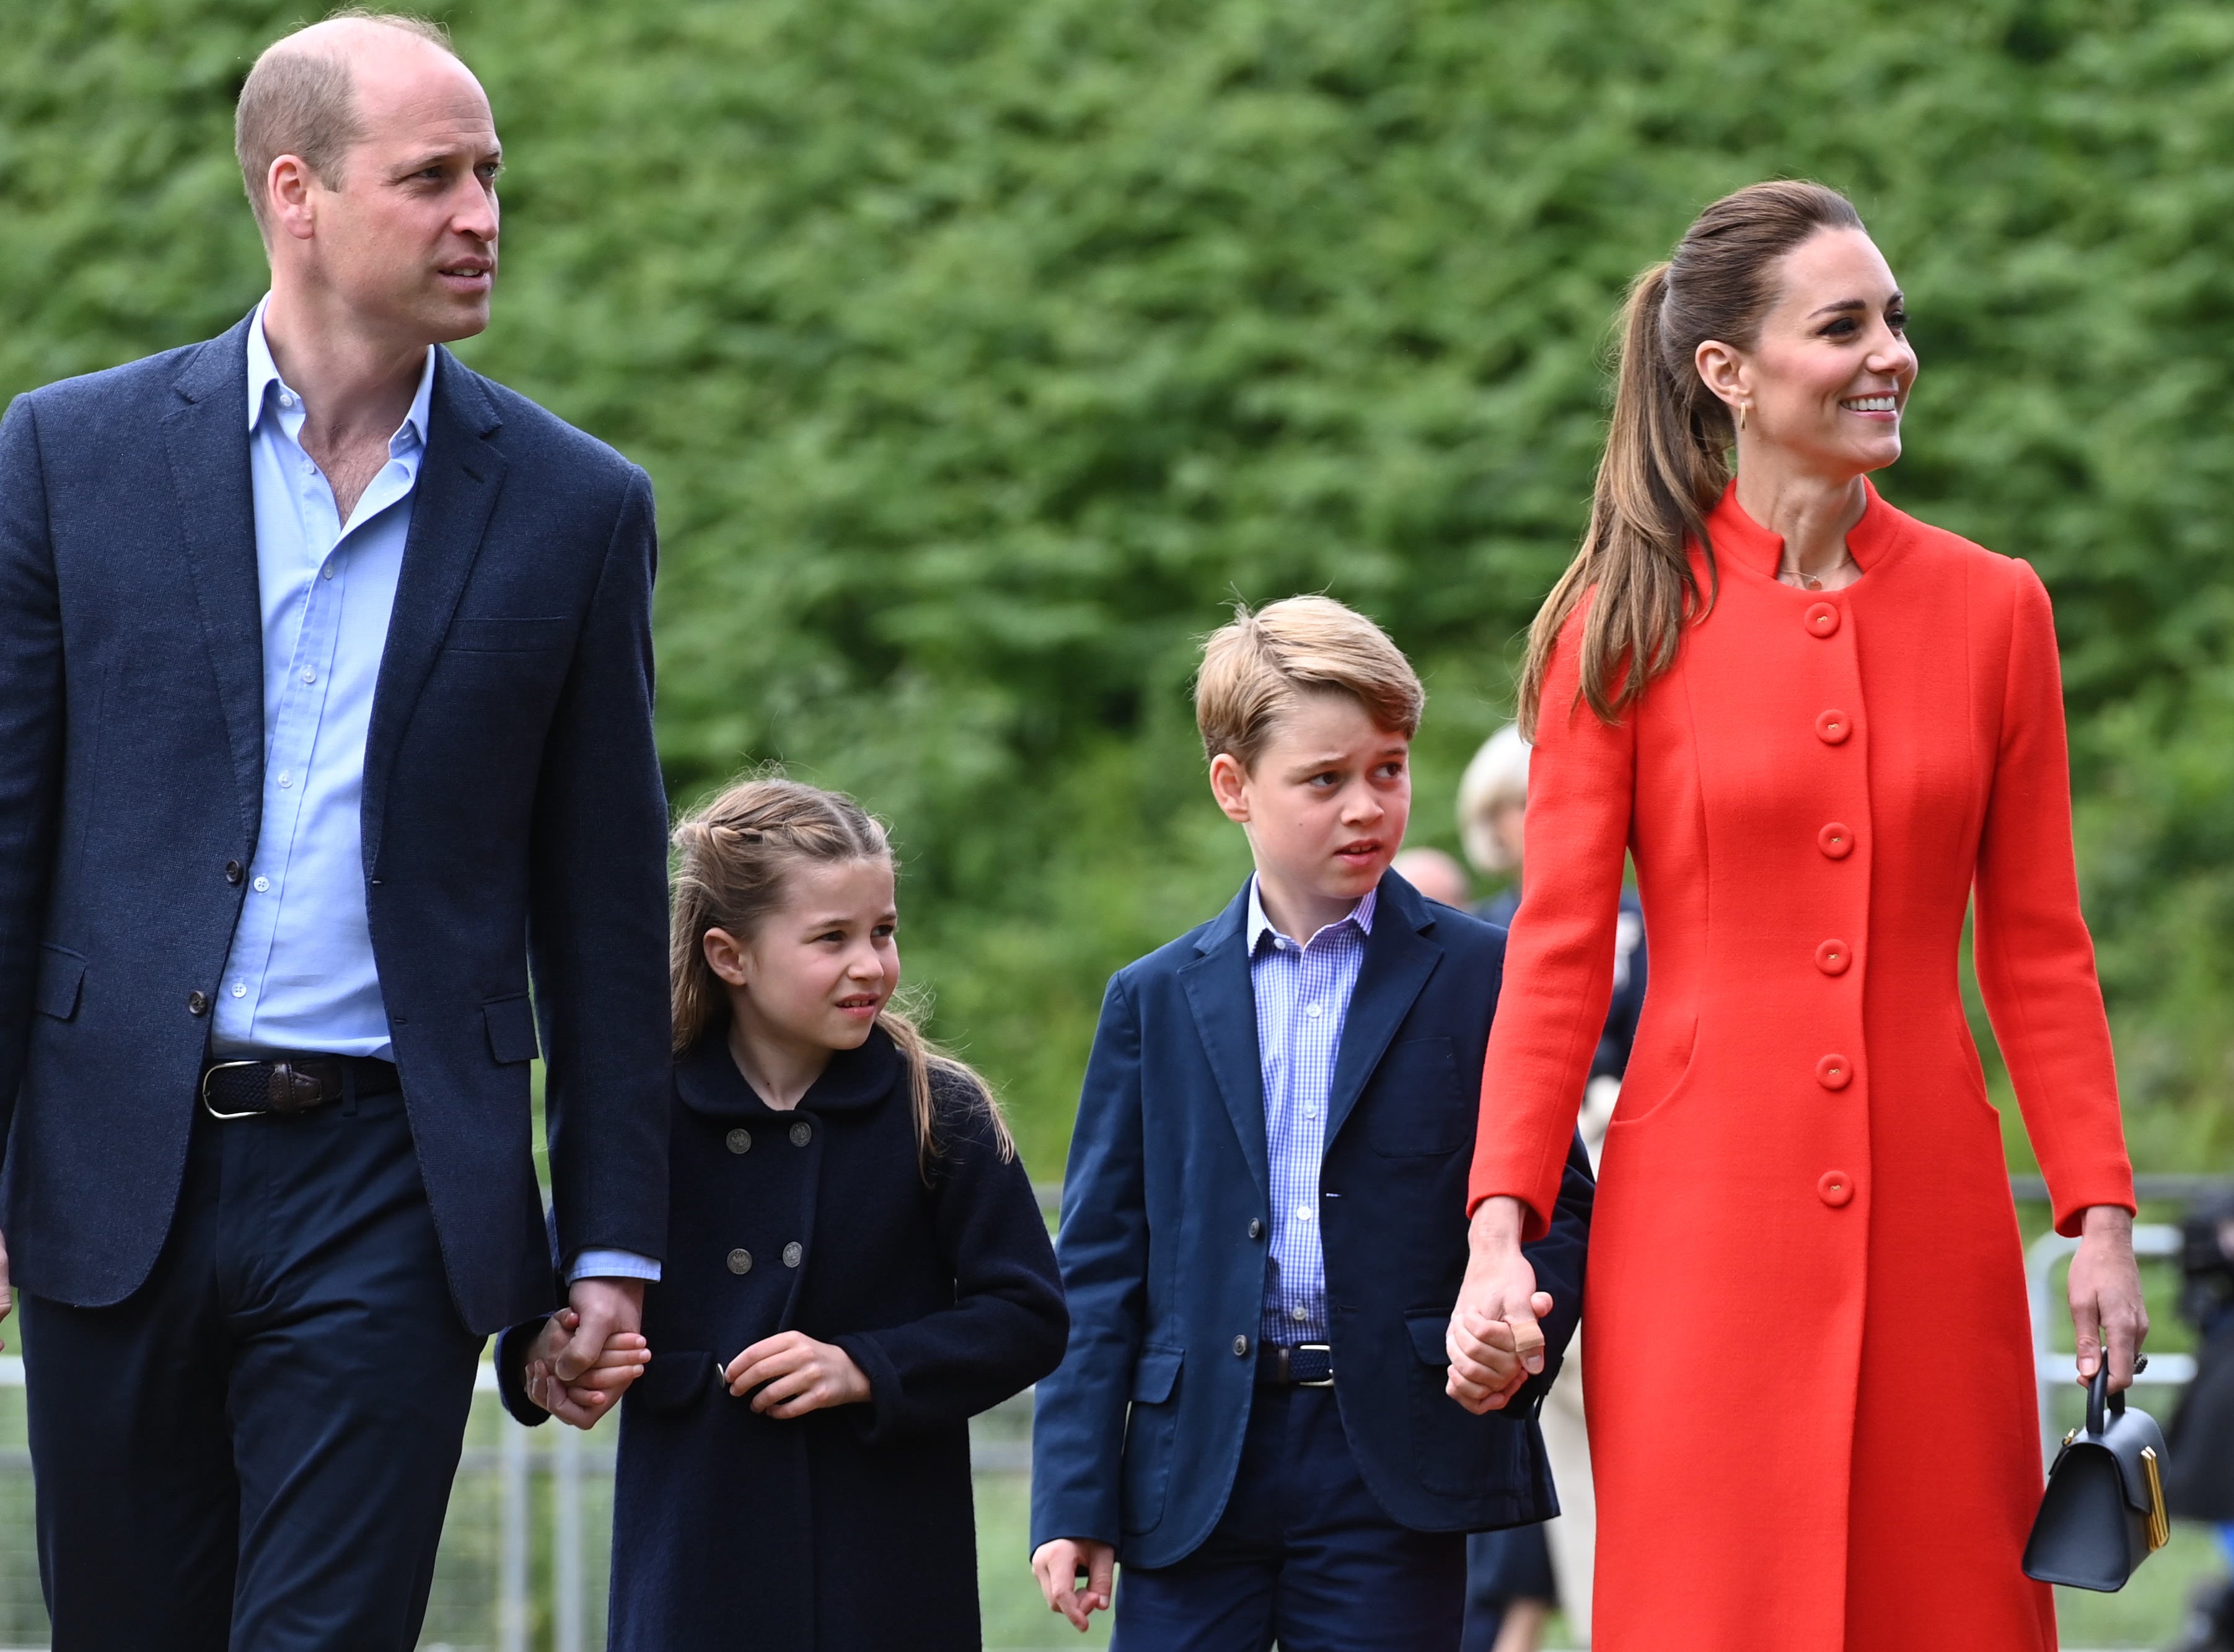 The then Duke and Duchess of Cambridge, Prince George and Princess Charlotte during their visit to Cardiff Castle (Ashley Crowden/PA)